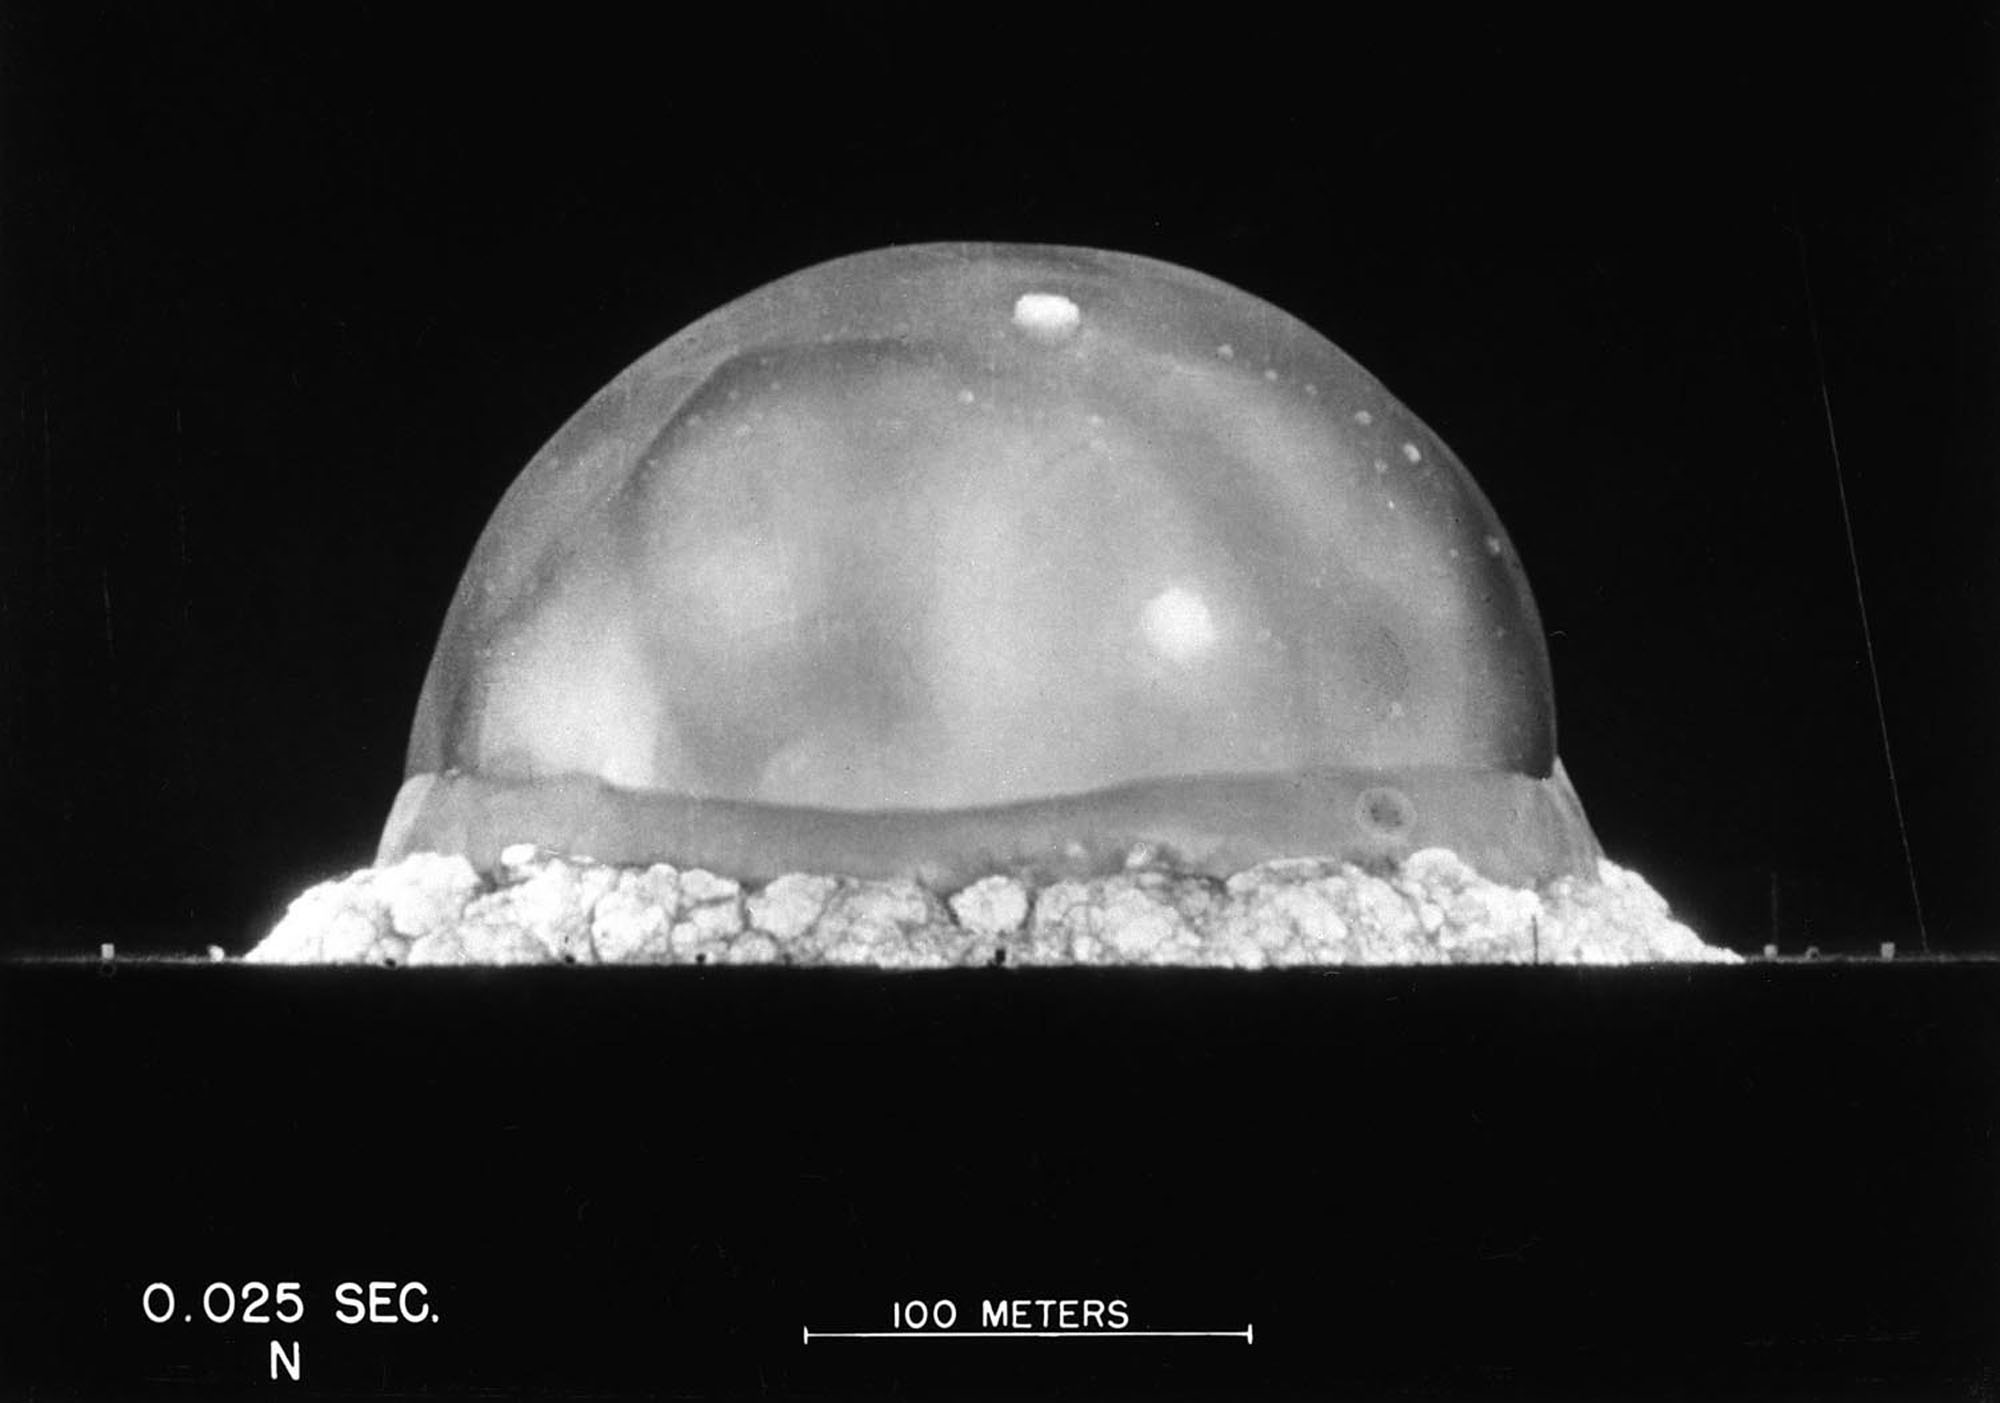 Trinity Site - World's First Nuclear Explosion